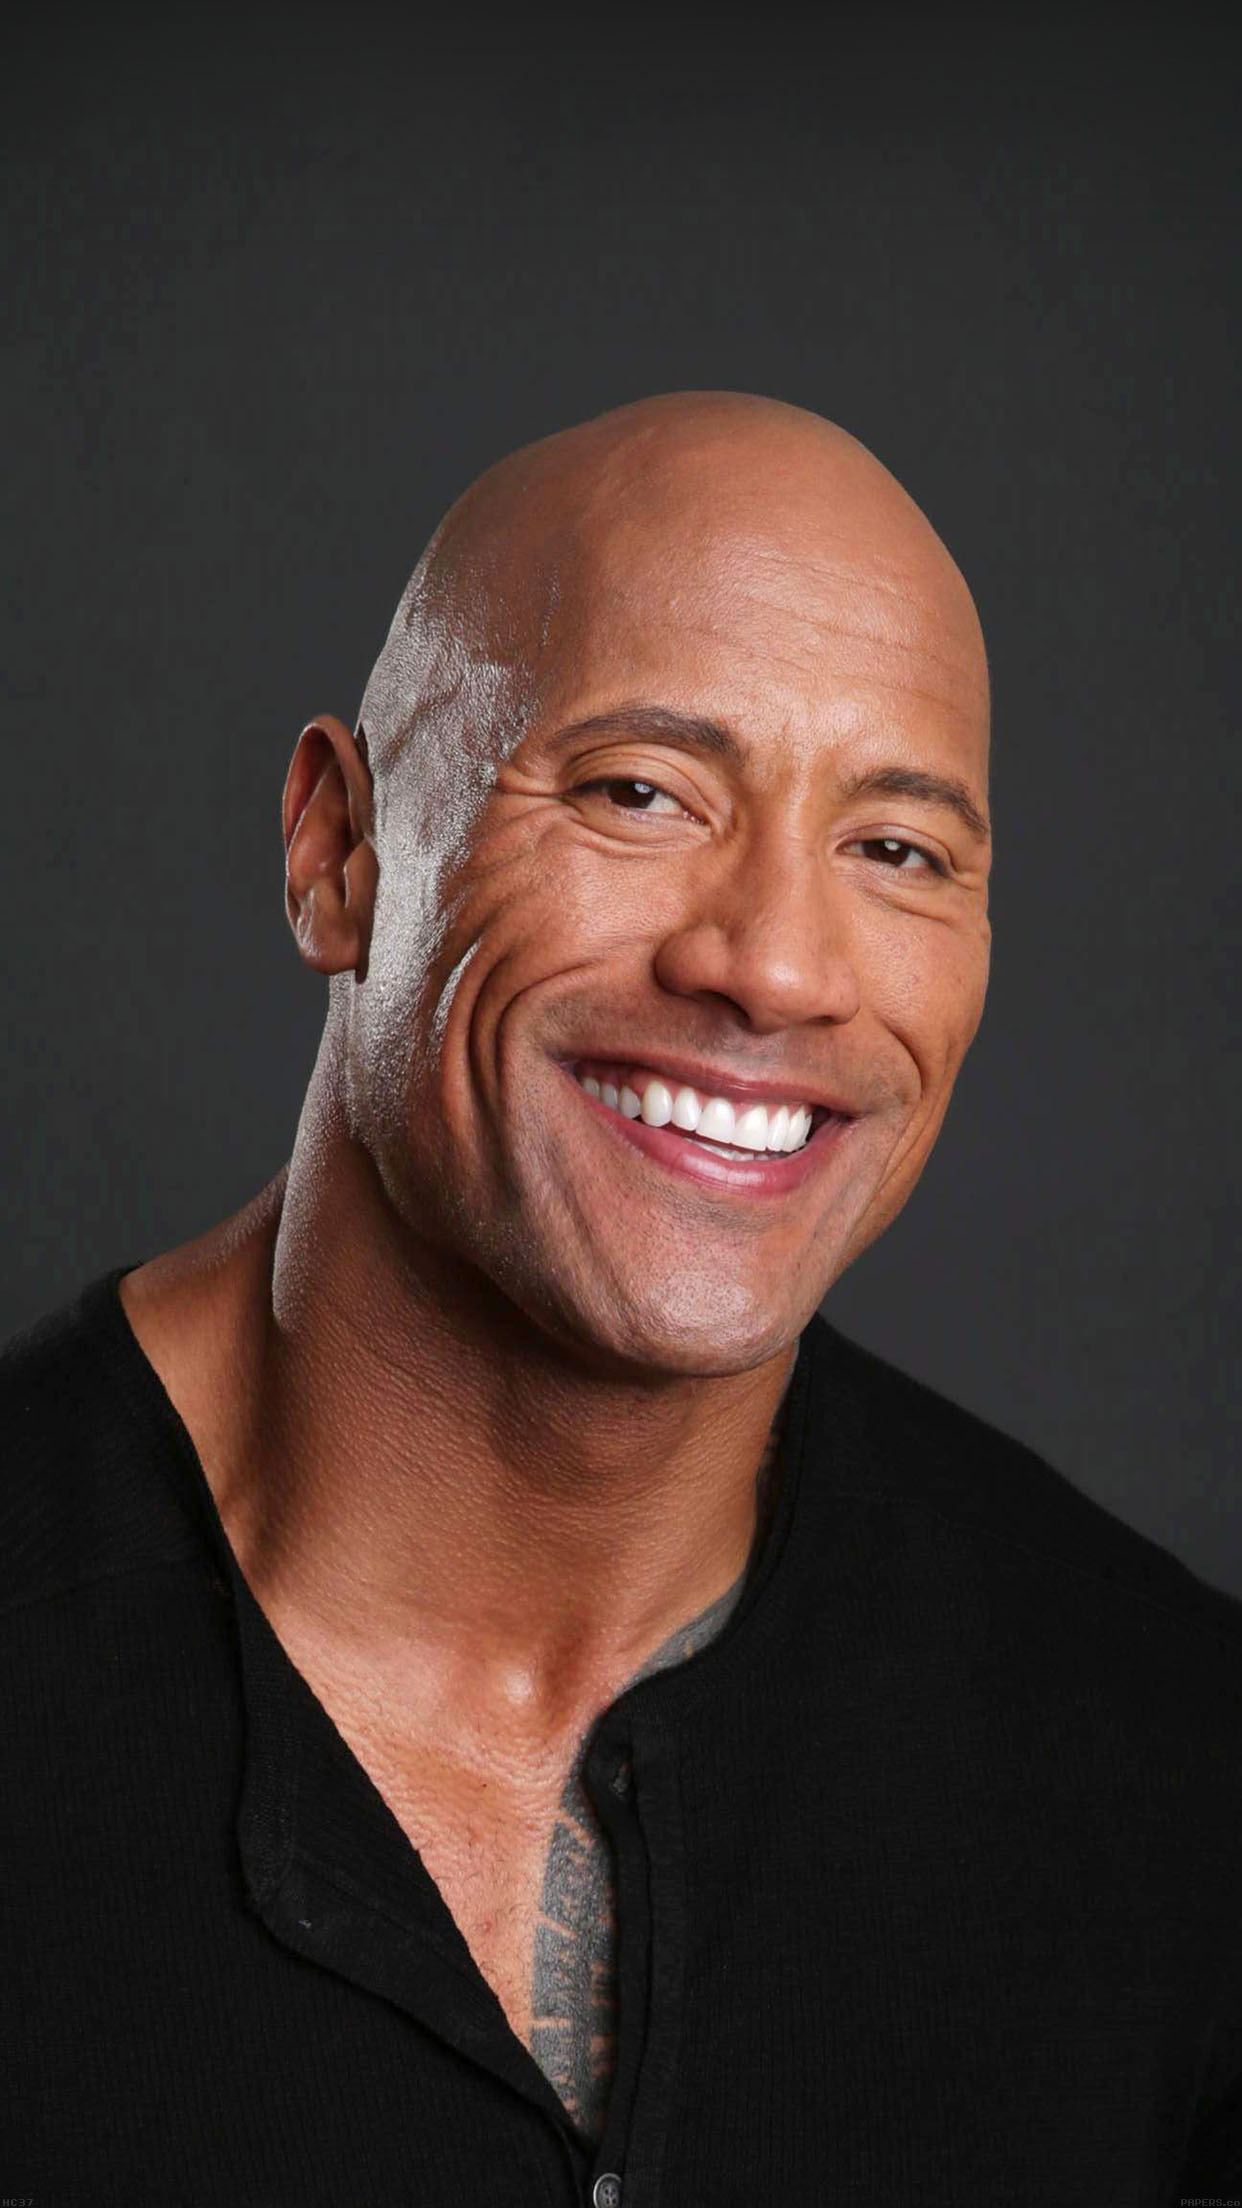 The Rock Dwayne Johnson Action Actor Celebrity Android wallpaper